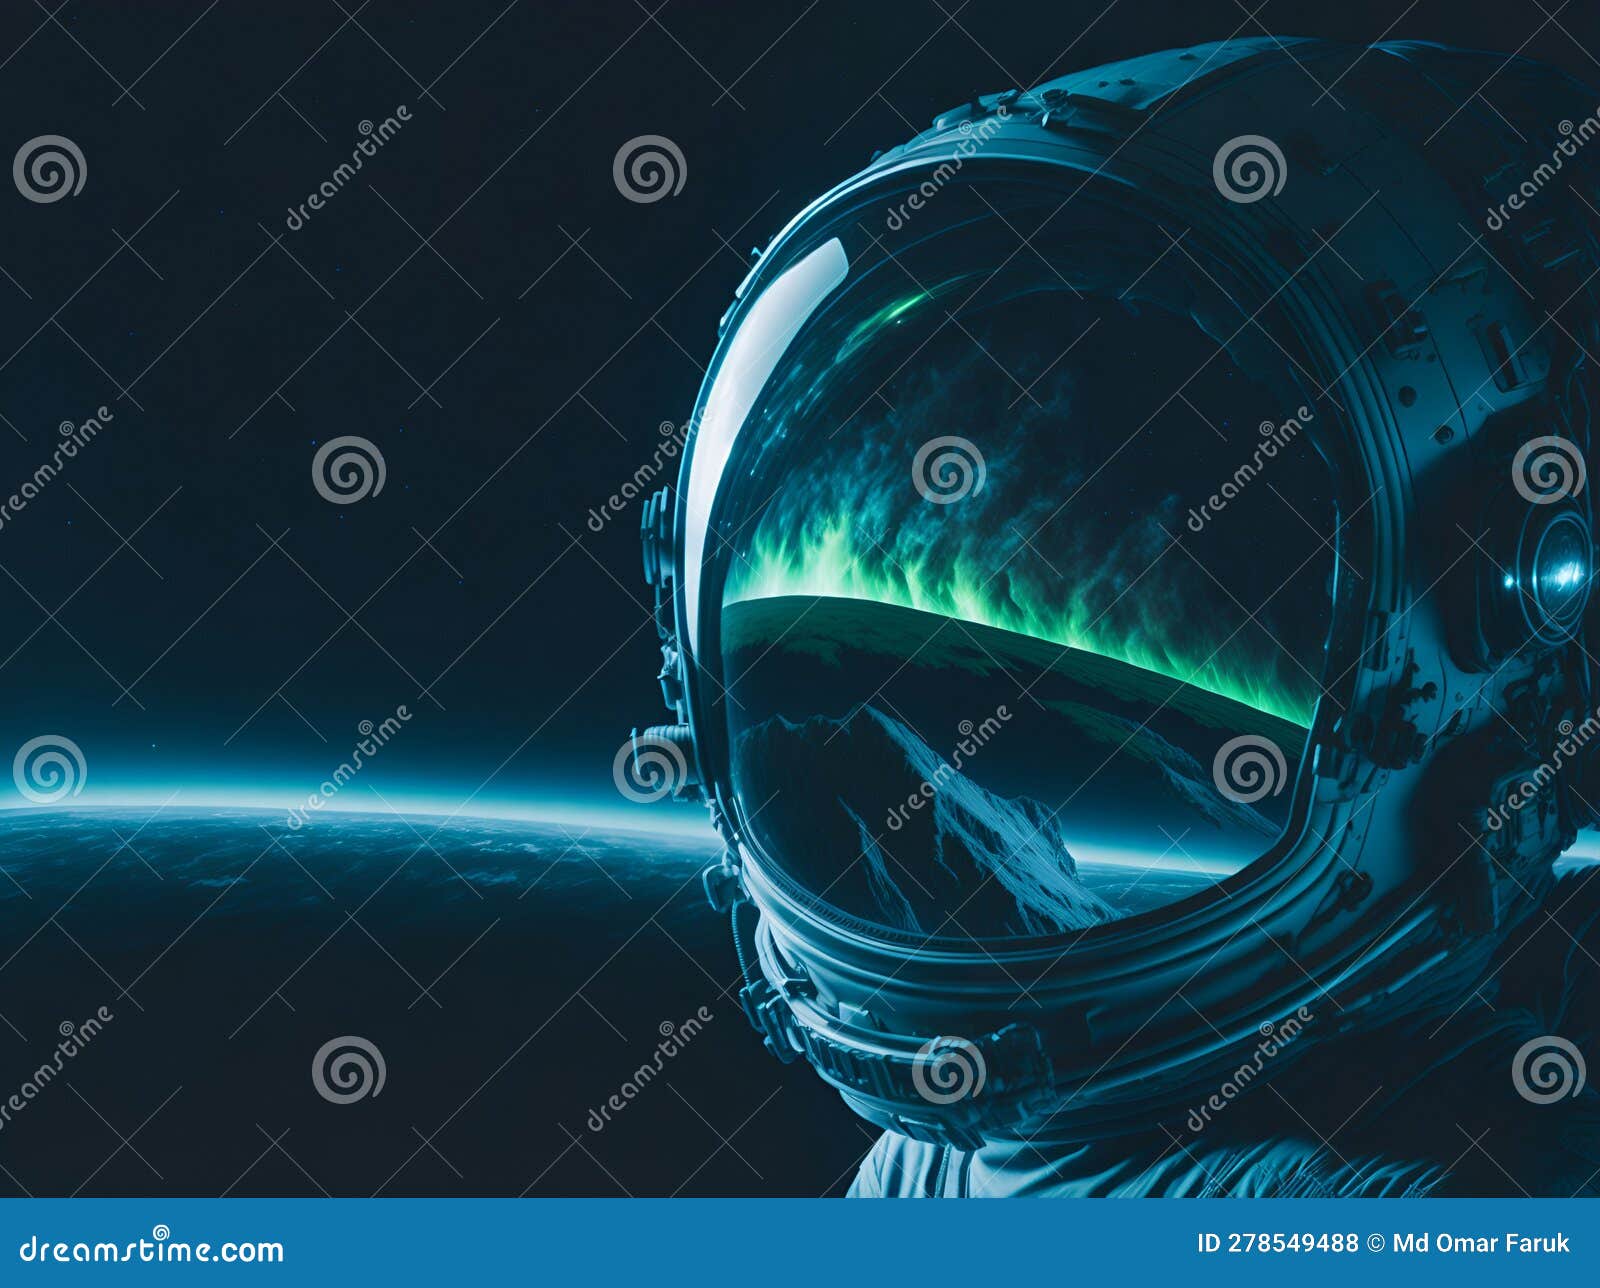 a breathtaking reflection of earth in space an astronautâs helmet.